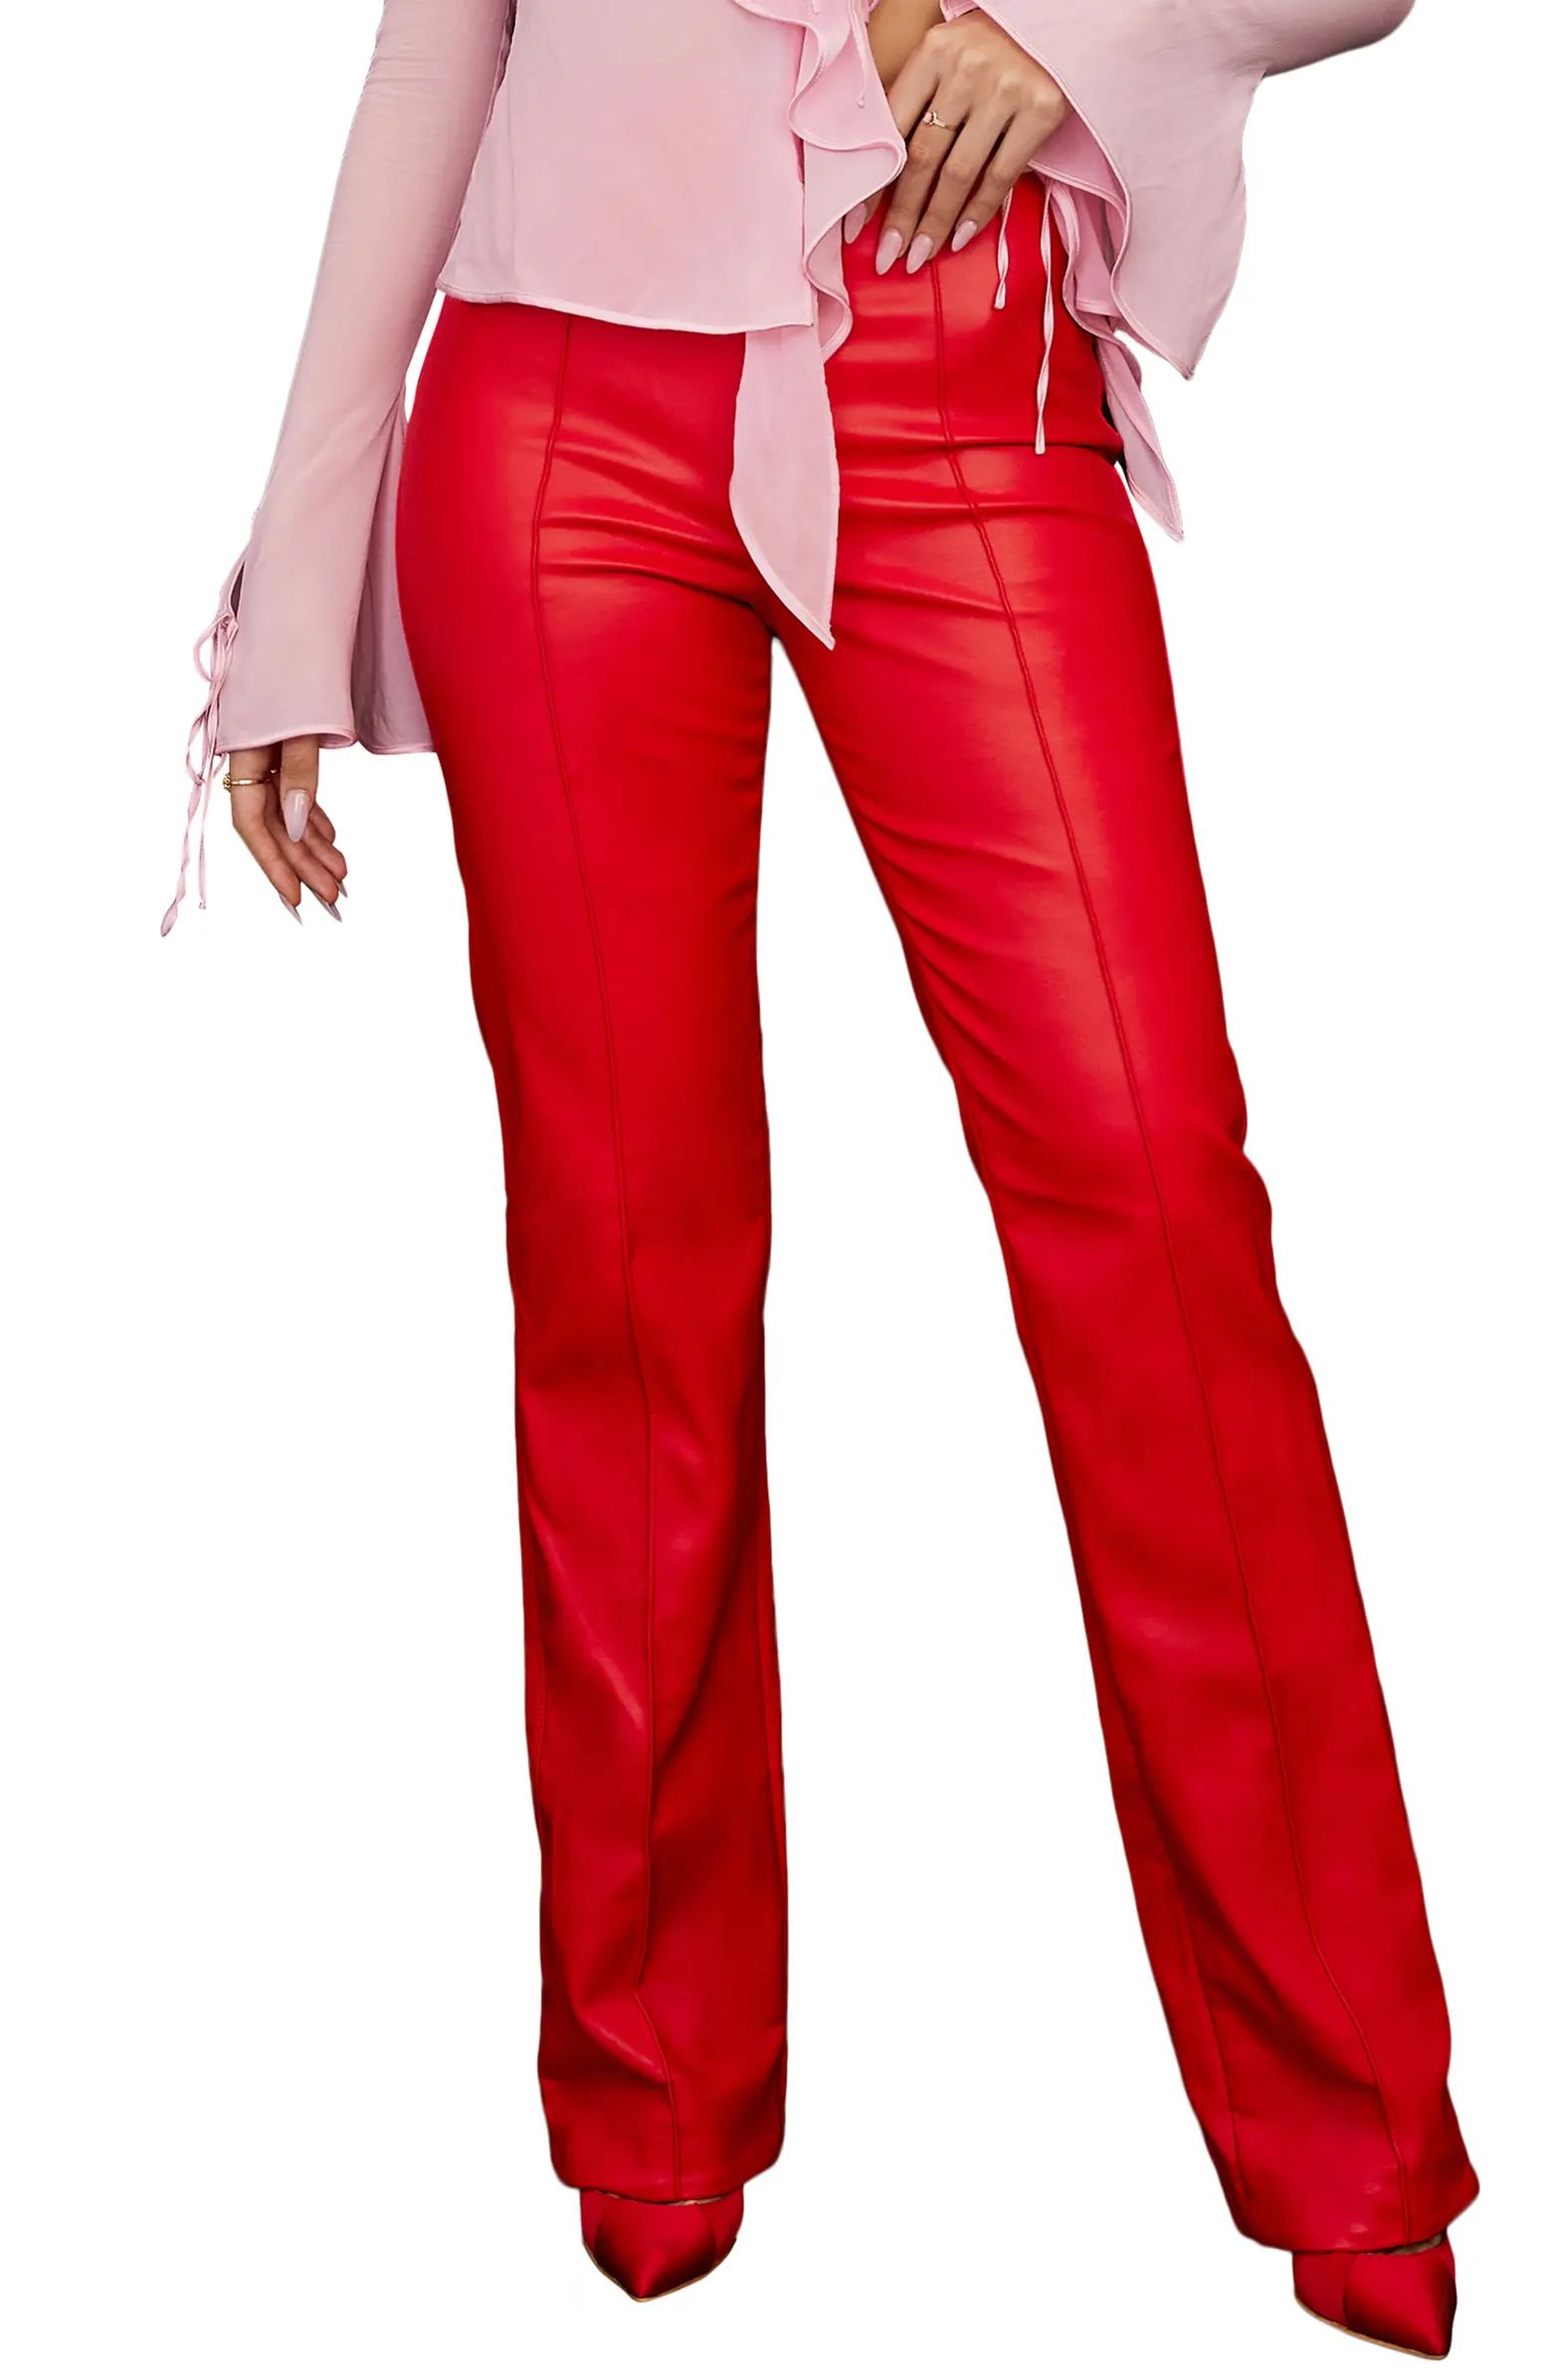 HOUSE OF CB Elenaora Faux Leather Trousers | Nordstrom | Nordstrom